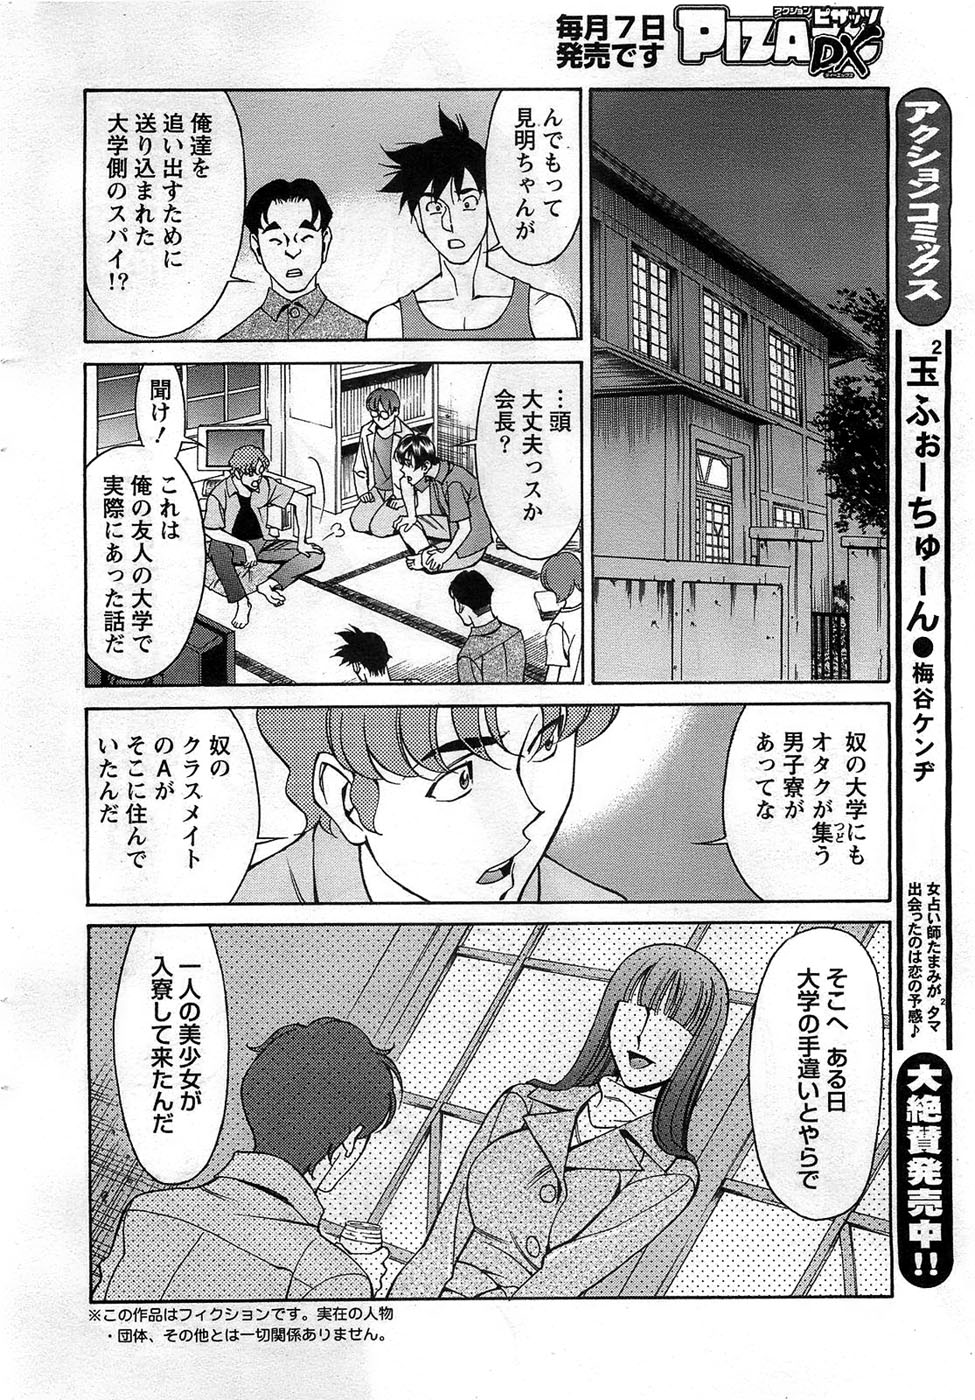 Action Pizazz DX 2008-11 page 26 full